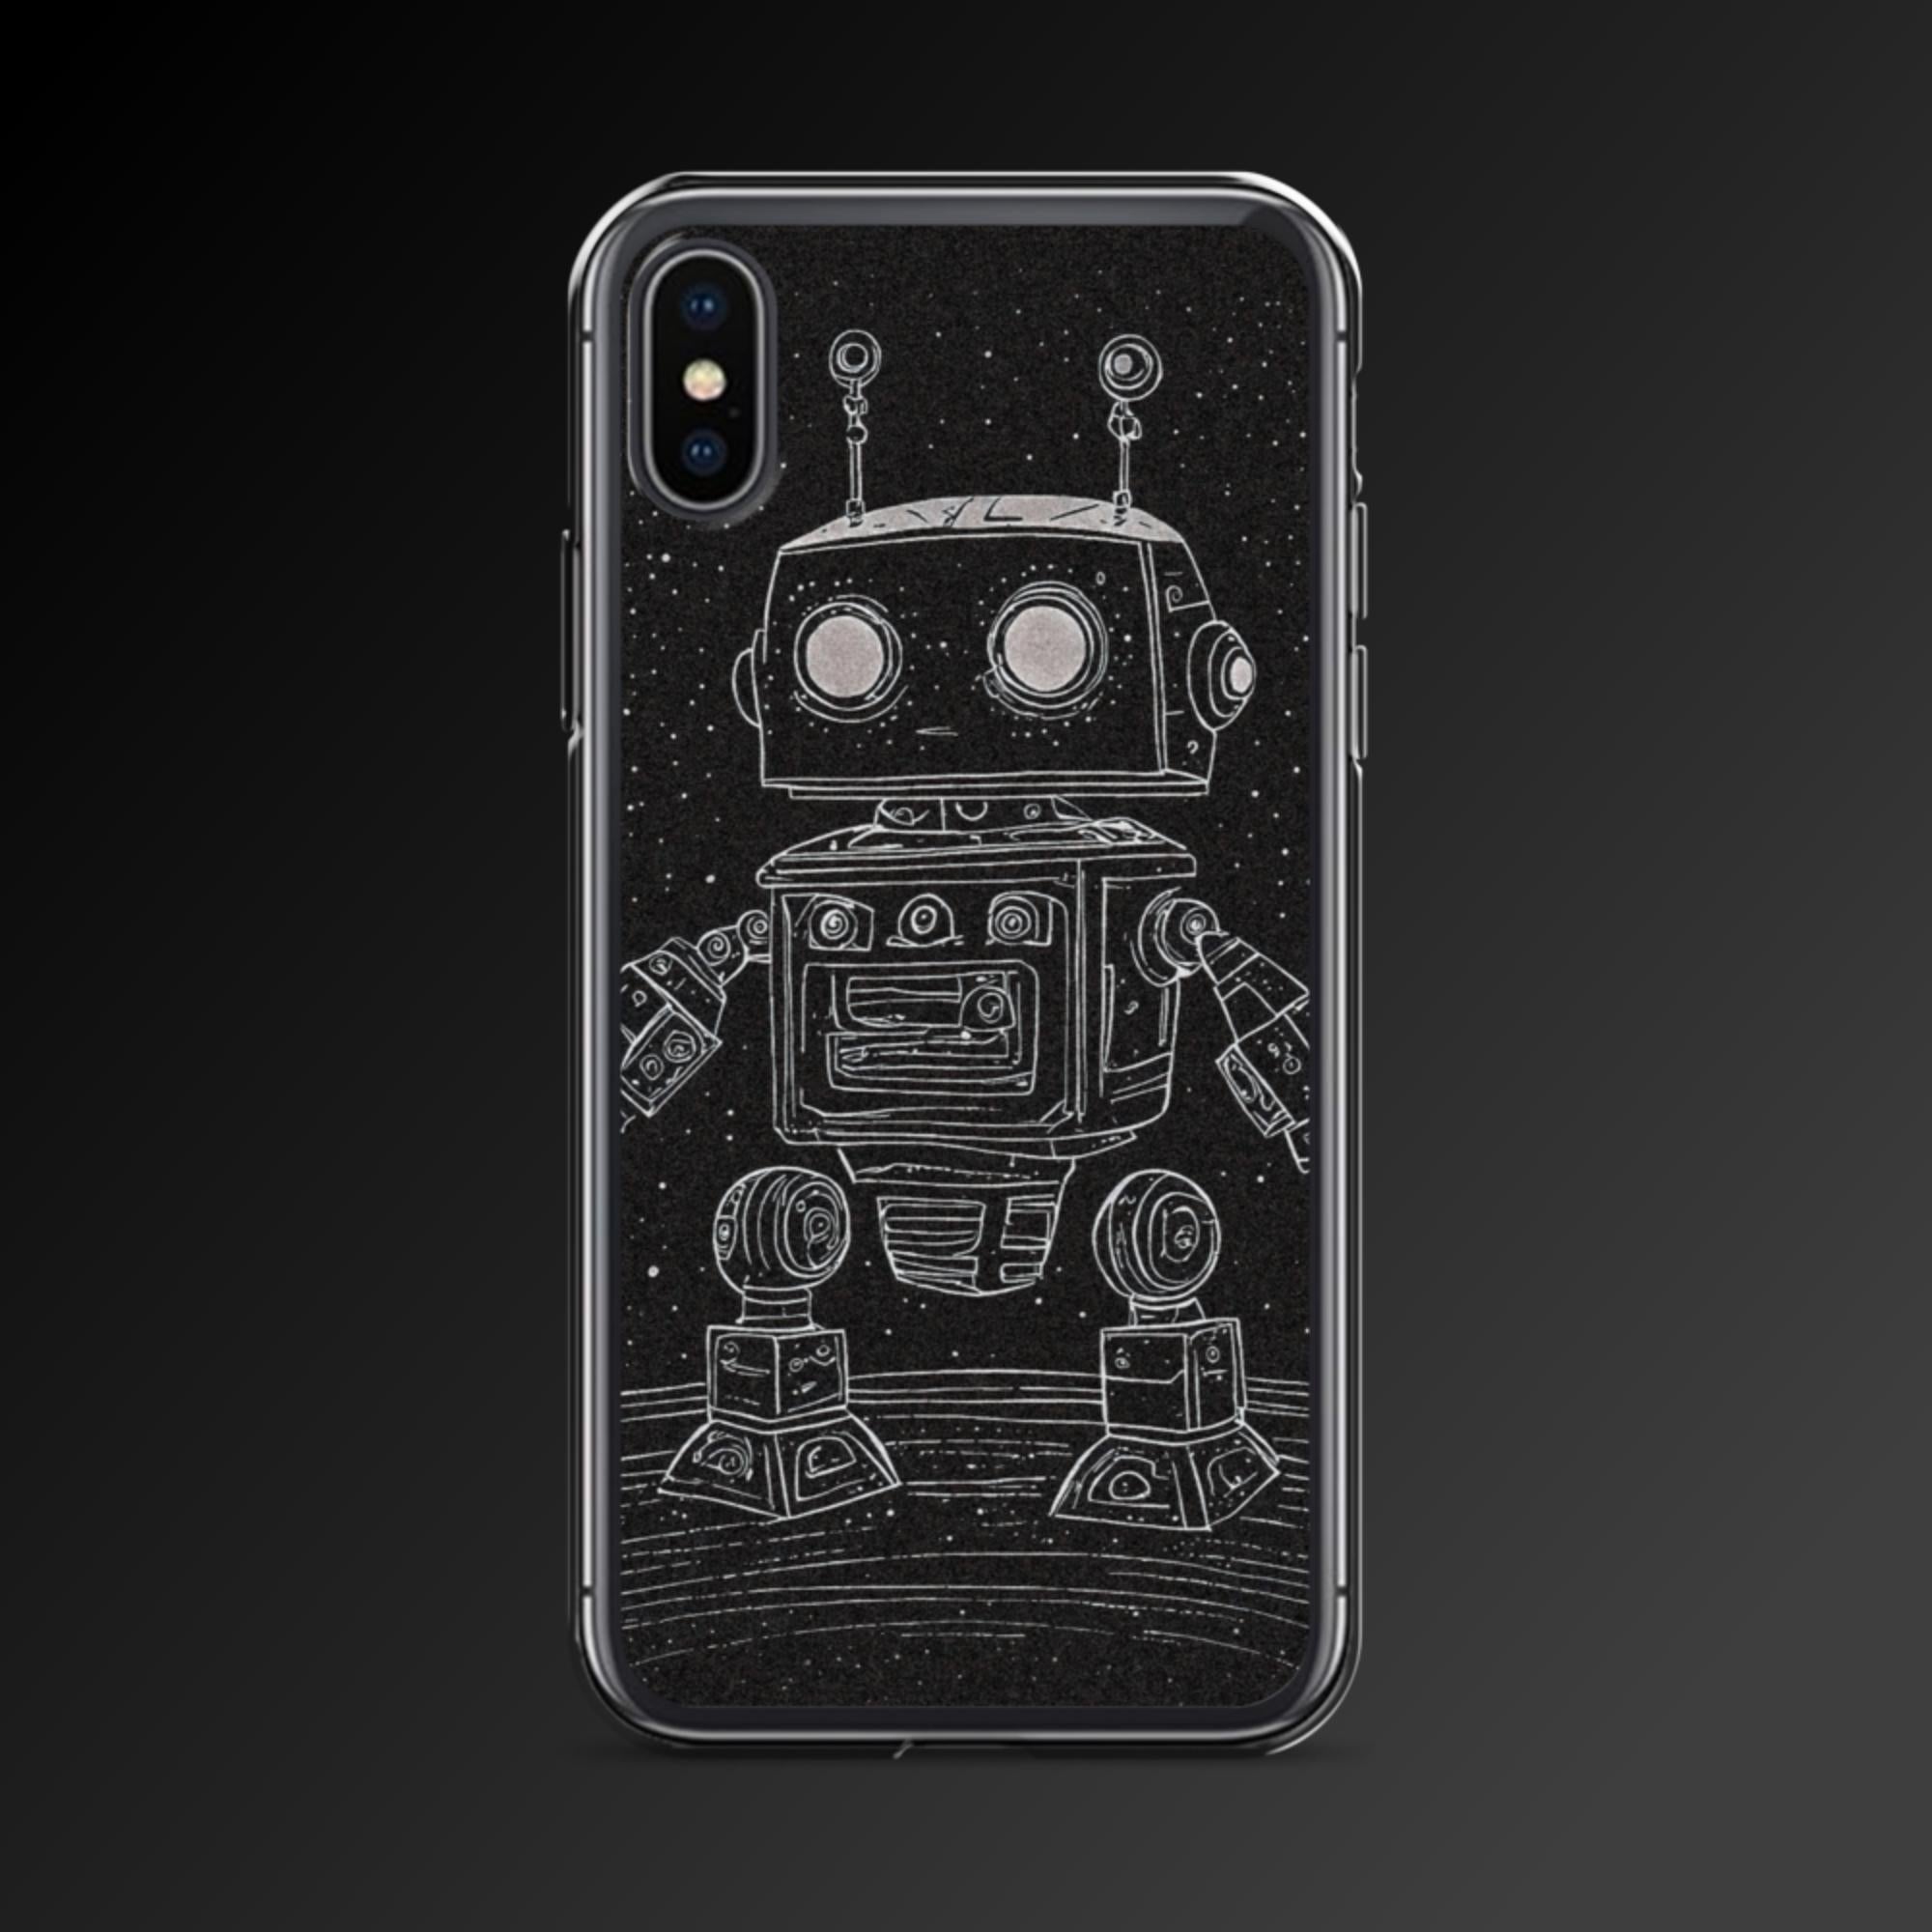 "Grayscale starobotics" clear iphone case - Clear iphone case - Ever colorful